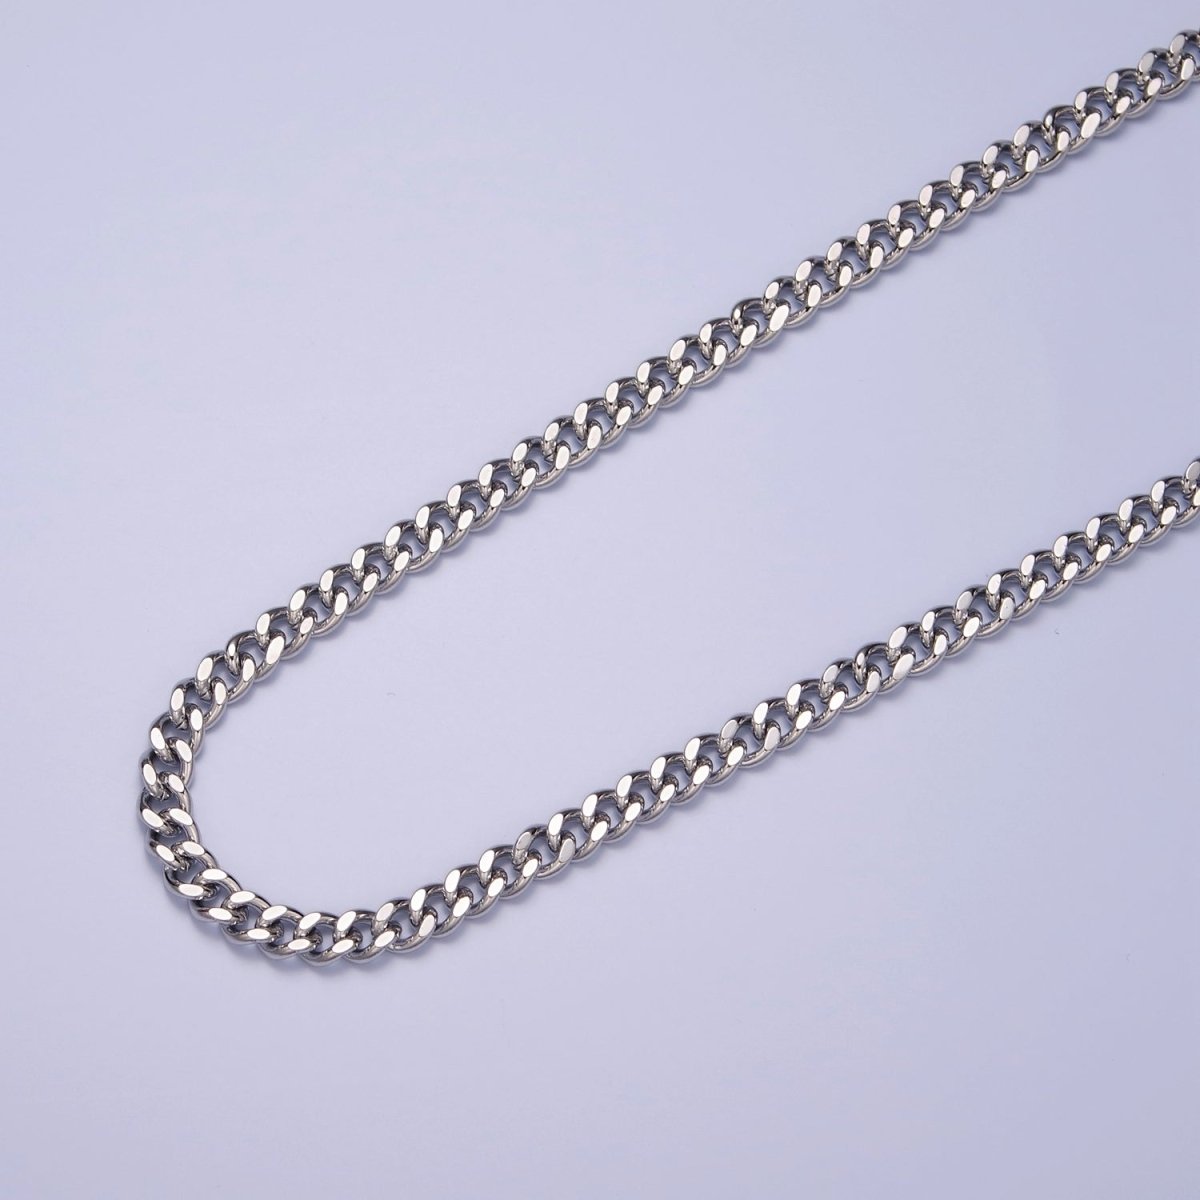 4.5mm, 5mm Silver Curb Link Unfinished Chains 19.5 Inches by Meter | WA-1402 WA-1401 Clearance Pricing - DLUXCA